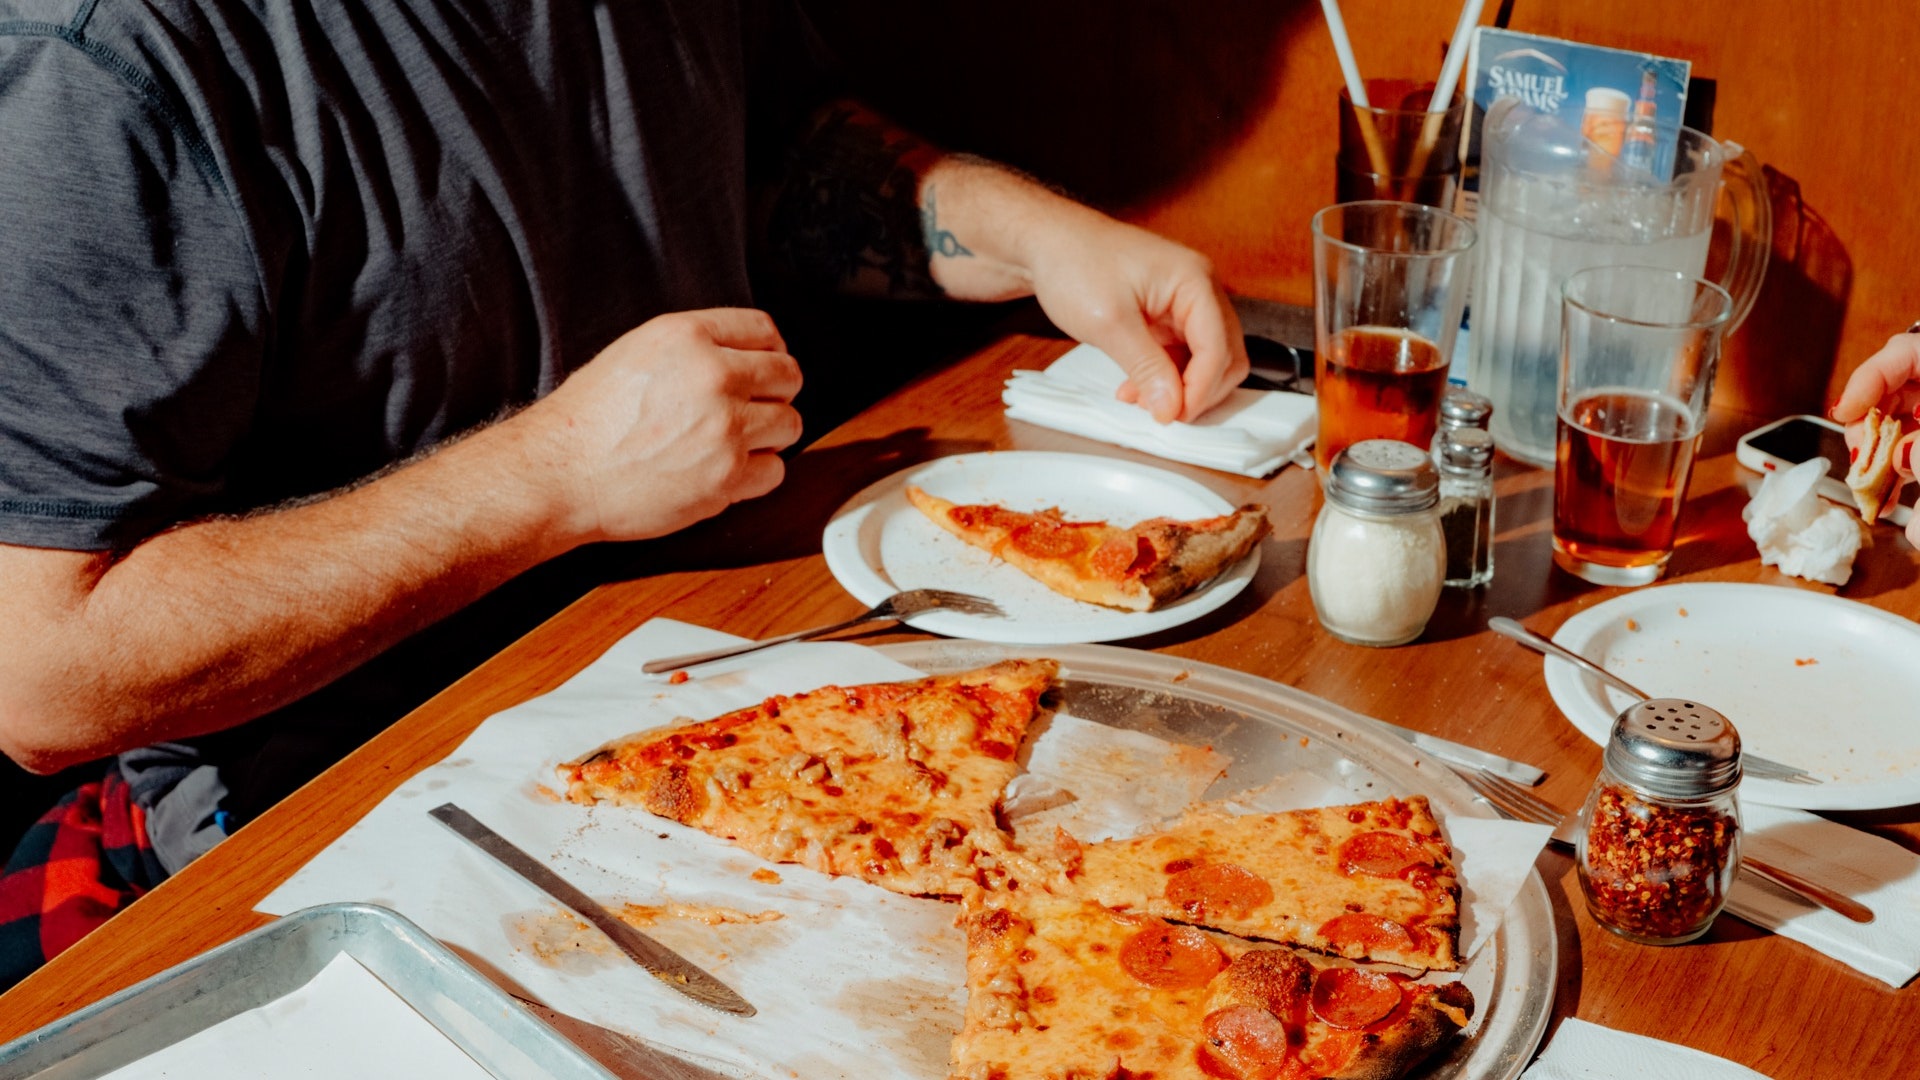 New London Pizza: Tasting Local Pizza Offerings